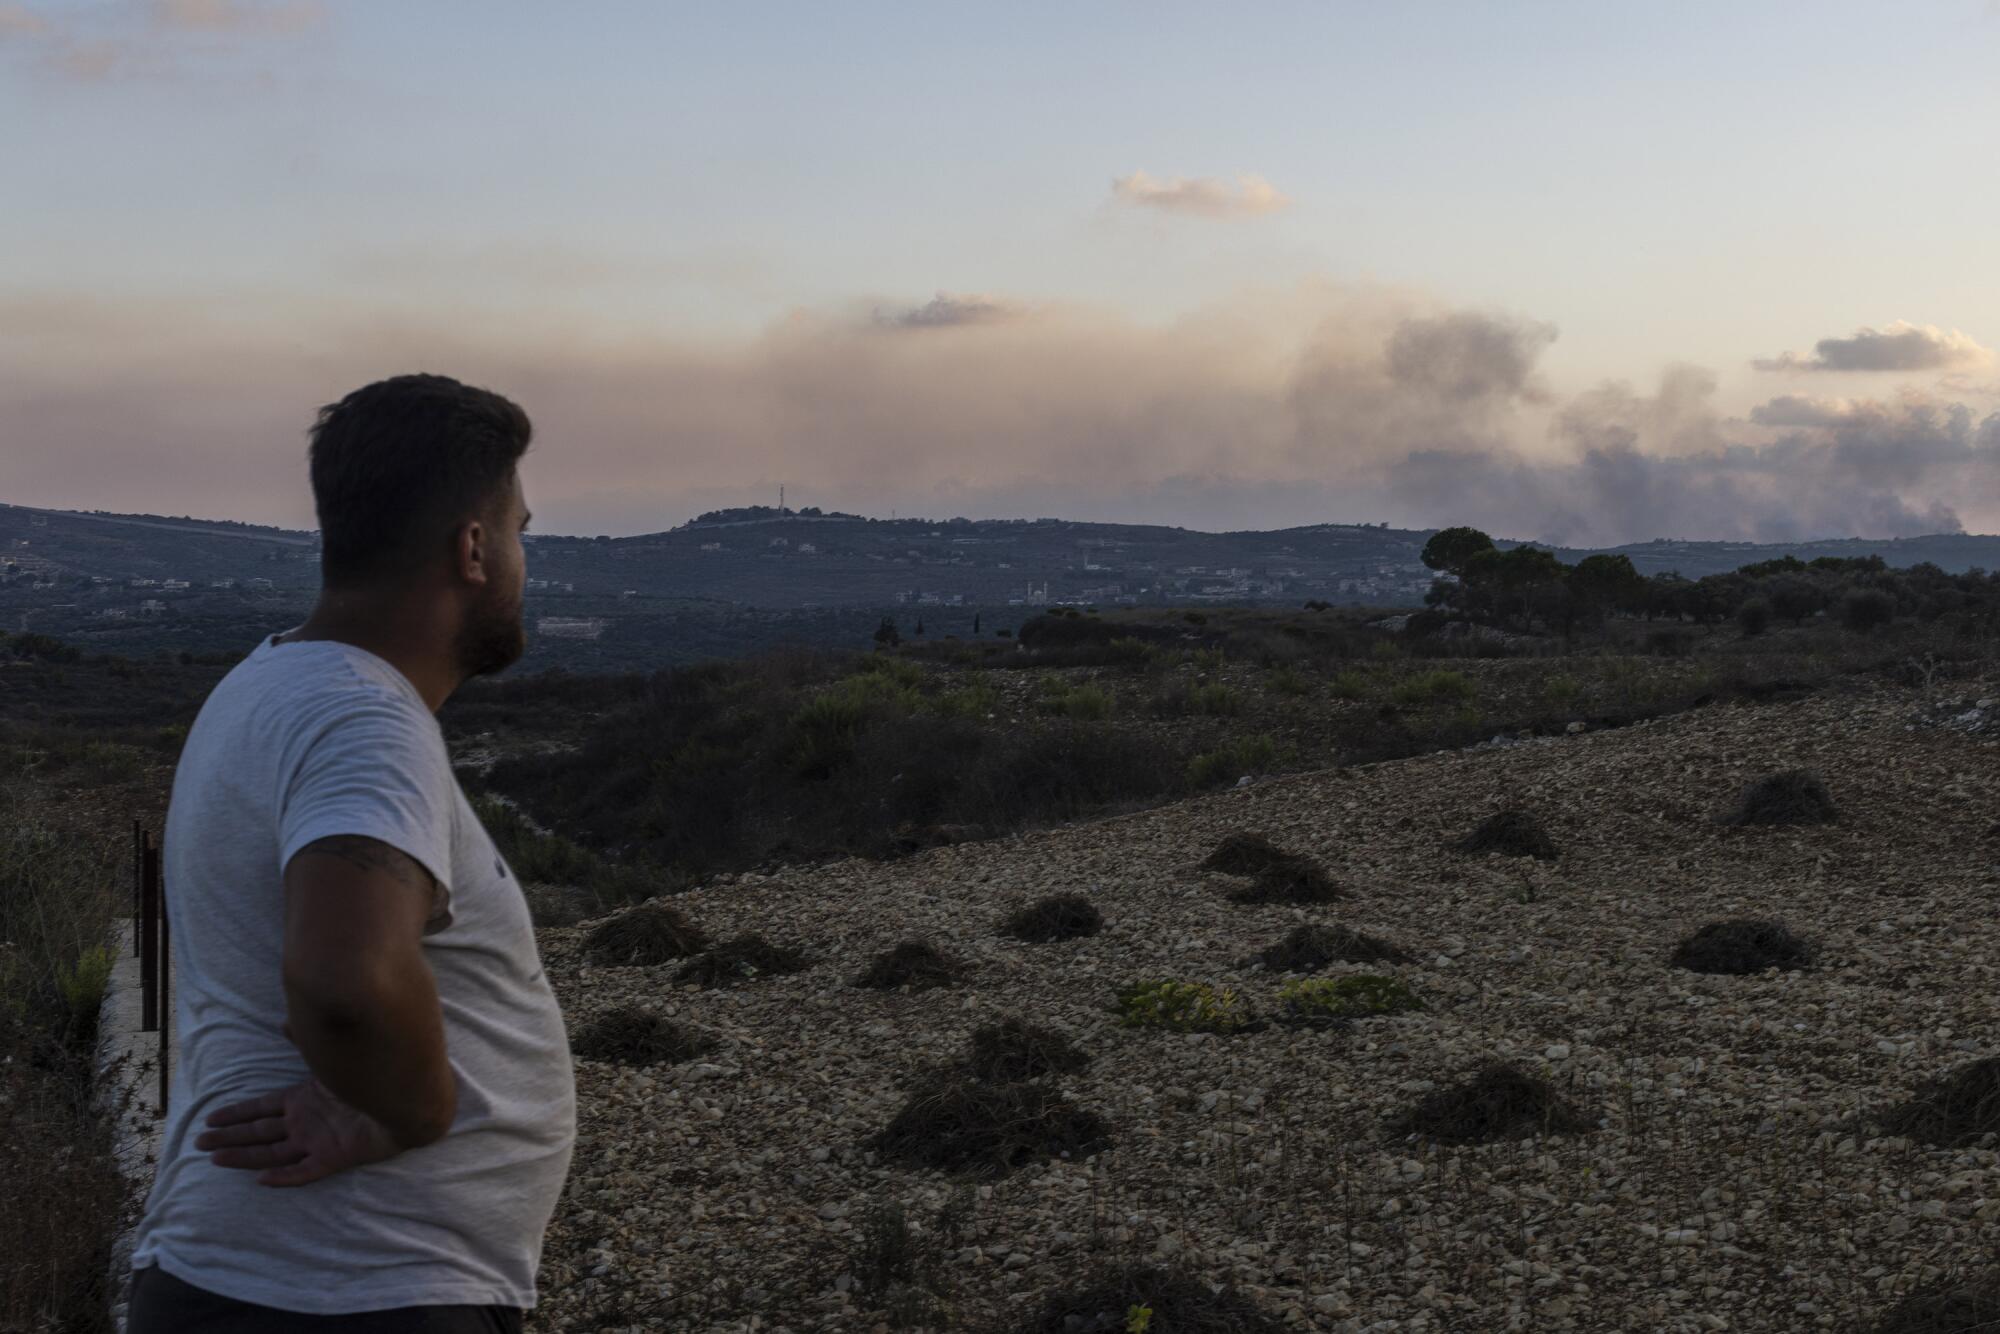 A man watches smoke rise over the distant hills.